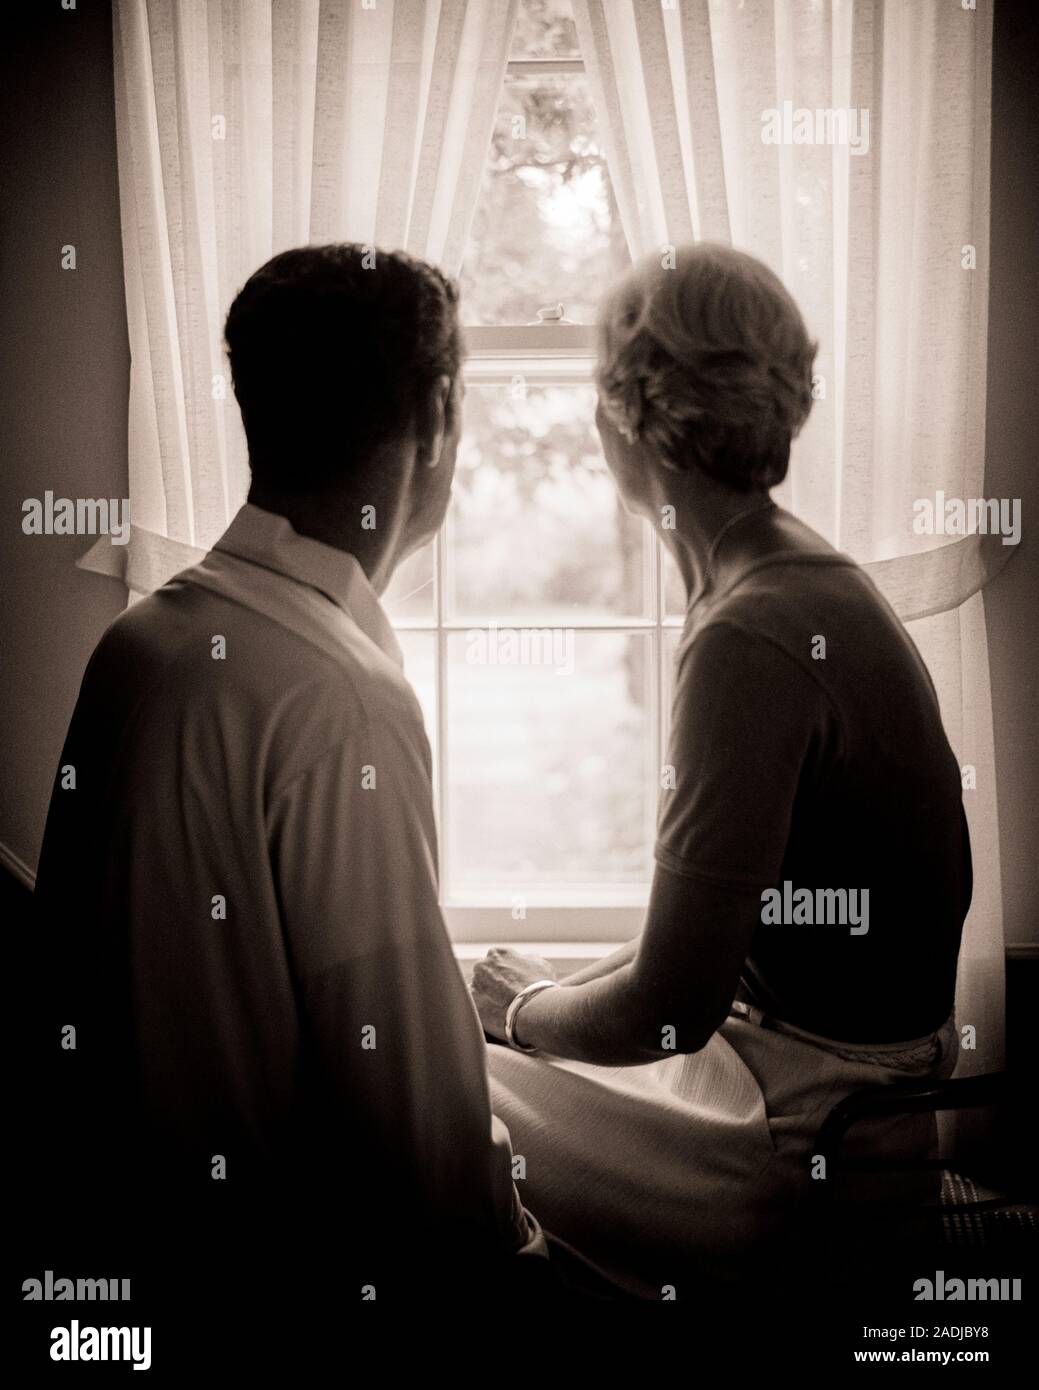 1970s ANONYMOUS SILHOUETTE OF MATURE MAN AND WOMAN LOOKING OUT OF WINDOW WITH TIE BACK CURTAINS - s20513 HAR001 HARS NOSTALGIA OLD FASHION GRAPHIC RETIRED FEAR TEAMWORK WORRY MYSTERY STRONG PROBLEM LIFESTYLE ELDER FEMALES MARRIED MOODY SPOUSE HUSBANDS ILLNESS HOME LIFE COPY SPACE FRIENDSHIP HALF-LENGTH LADIES PERSONS INSPIRATION CARING MALES RISK AILMENT RETIREMENT SERENITY SILHOUETTES SPIRITUALITY SENIOR MAN SENIOR ADULT TROUBLED B&W CONCERNED OUTLINE PARTNER SADNESS SENIOR WOMAN RETIREE SUFFERING OLD AGE OLDSTERS CRISIS OLDSTER SILHOUETTED AND FEELING MOOD POSSIBILITIES ELDERS CONCEPTUAL Stock Photo